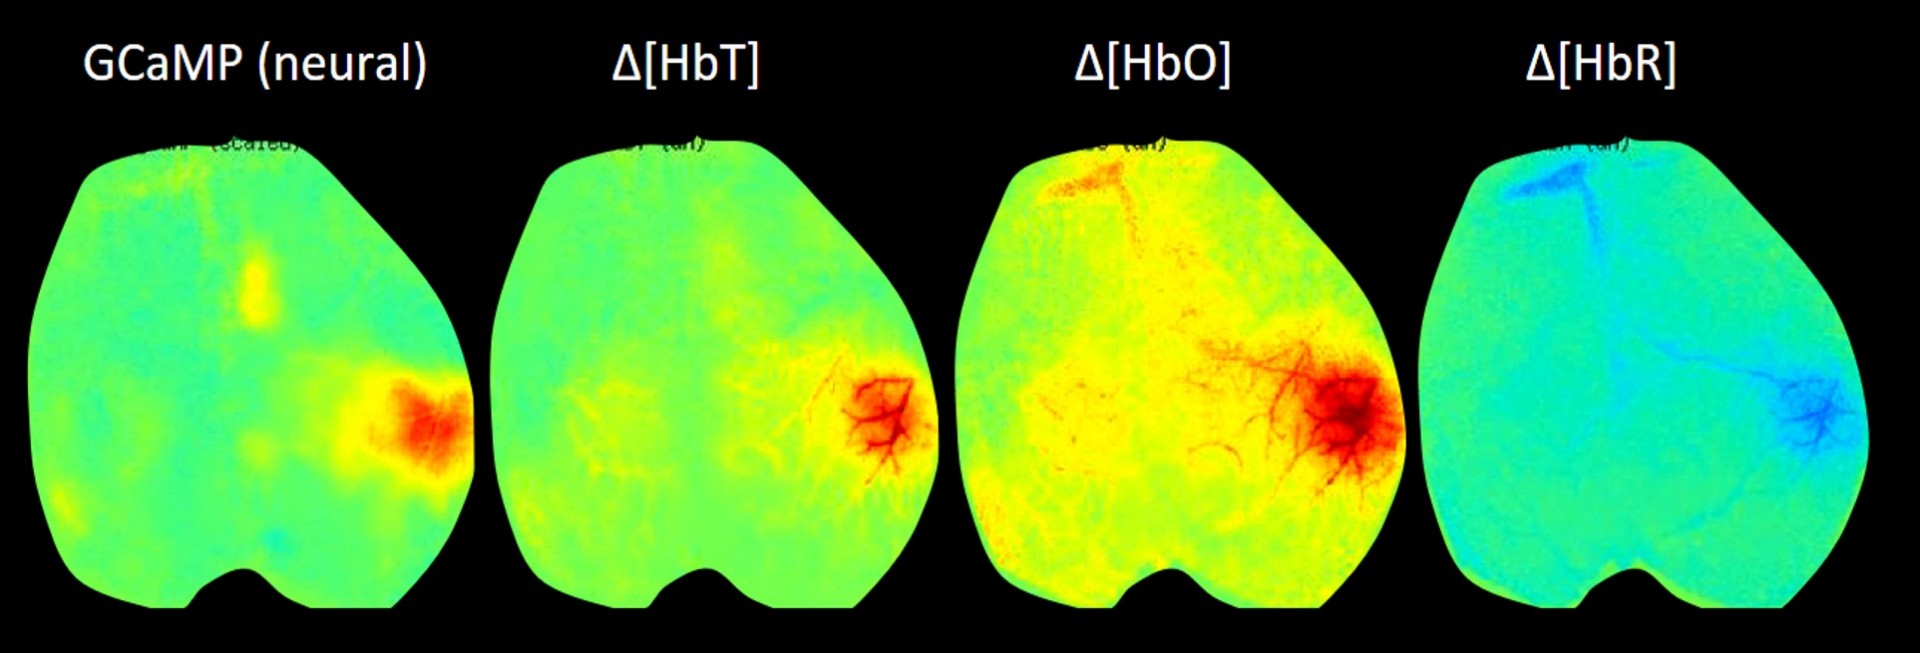 Widefield optical mapping of the neural and hemodynamic response to whisker stimulation